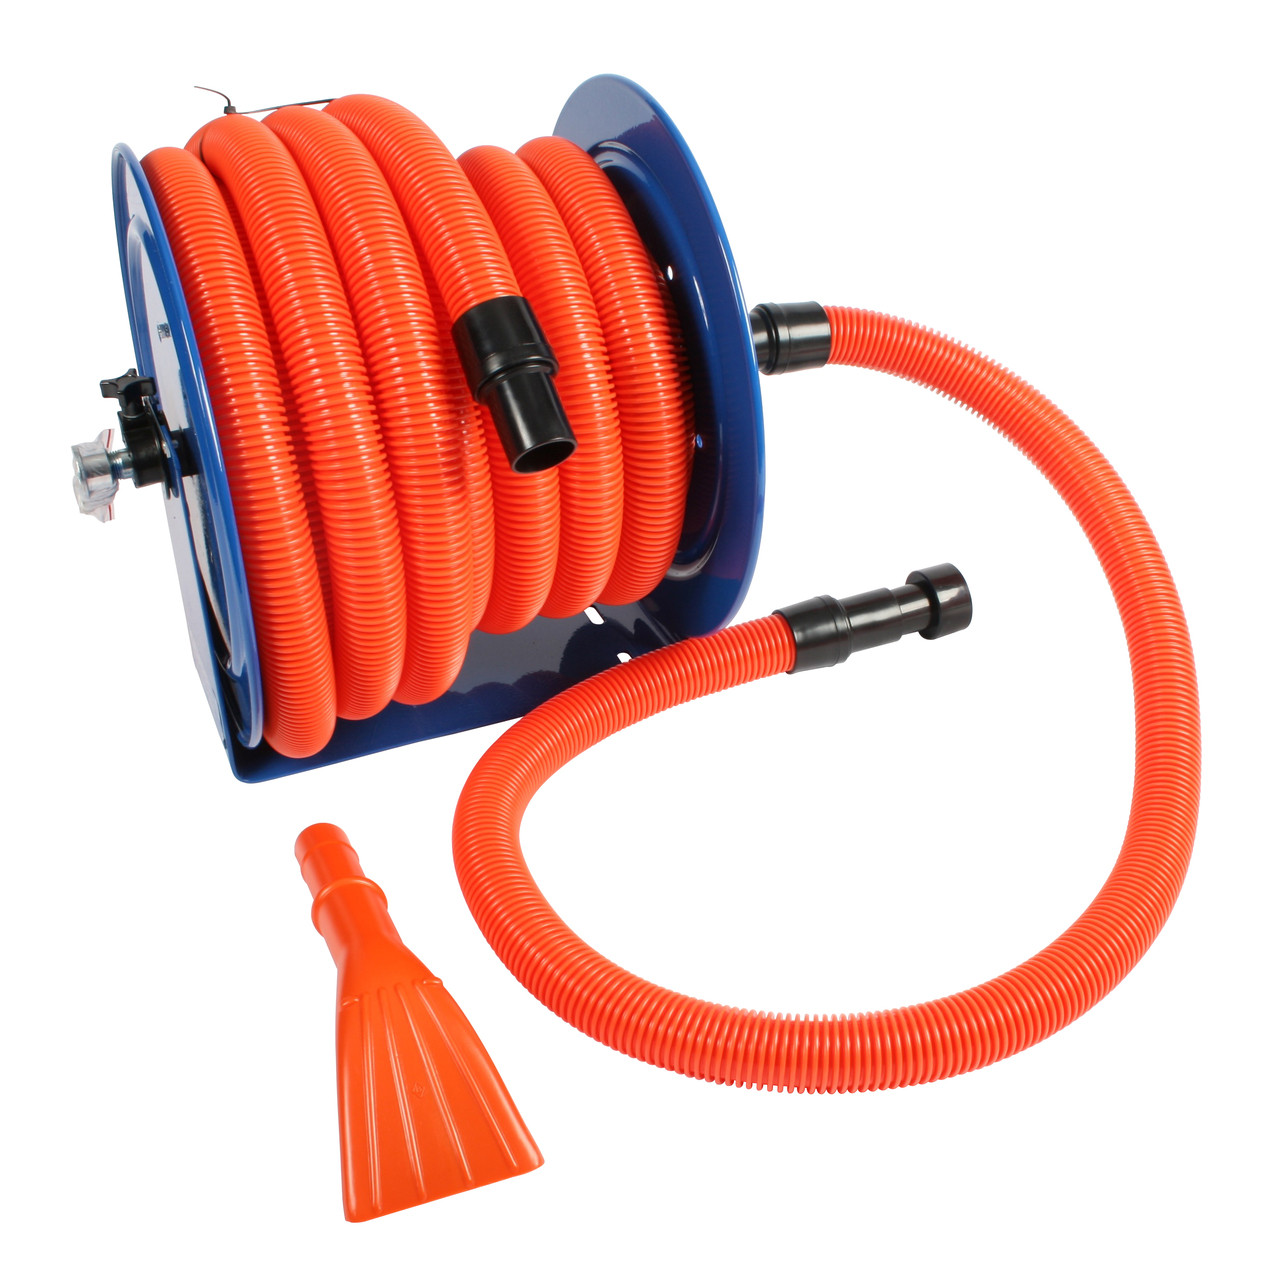 Hose Reel with 1.5 Inch x 50 Ft. Hose & 6 Ft. Connecting Hose